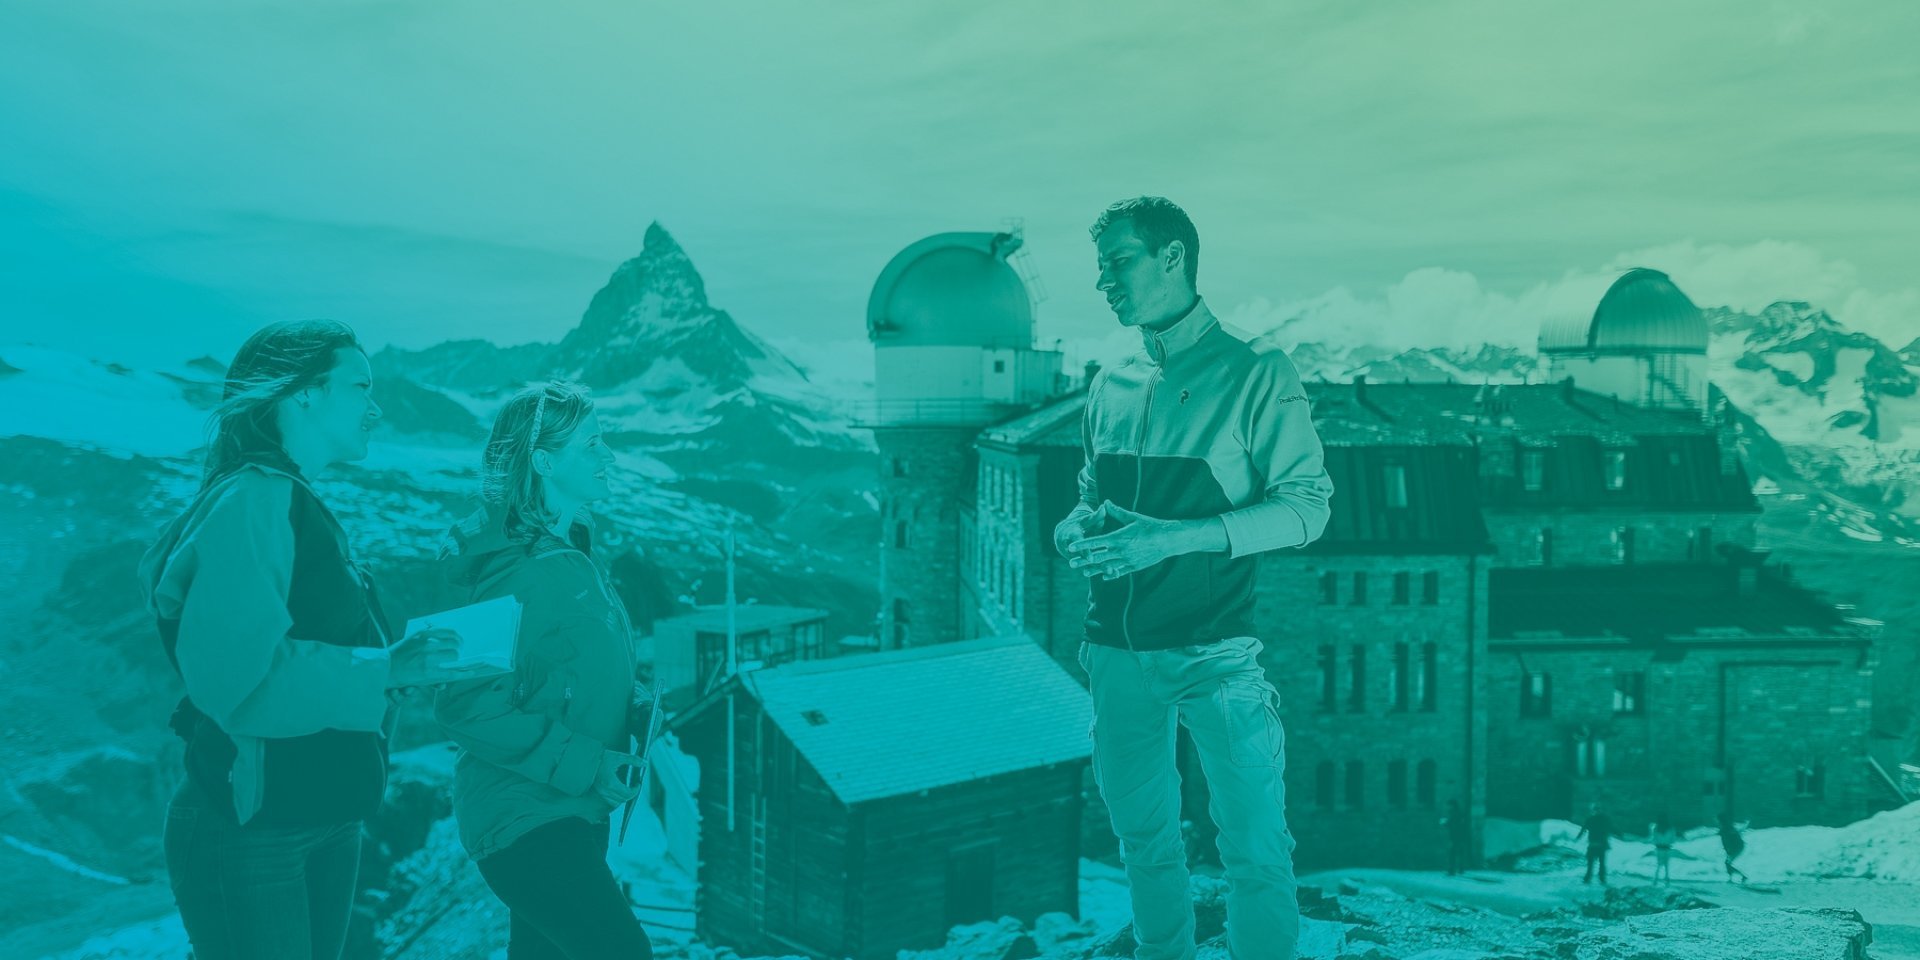 Bachelor in Tourism in Valais, unique in Switzerland, offering a multilingual program (FR/DE/EN) focused on sustainability and digitalization, training future leaders in the tourism and service economy.